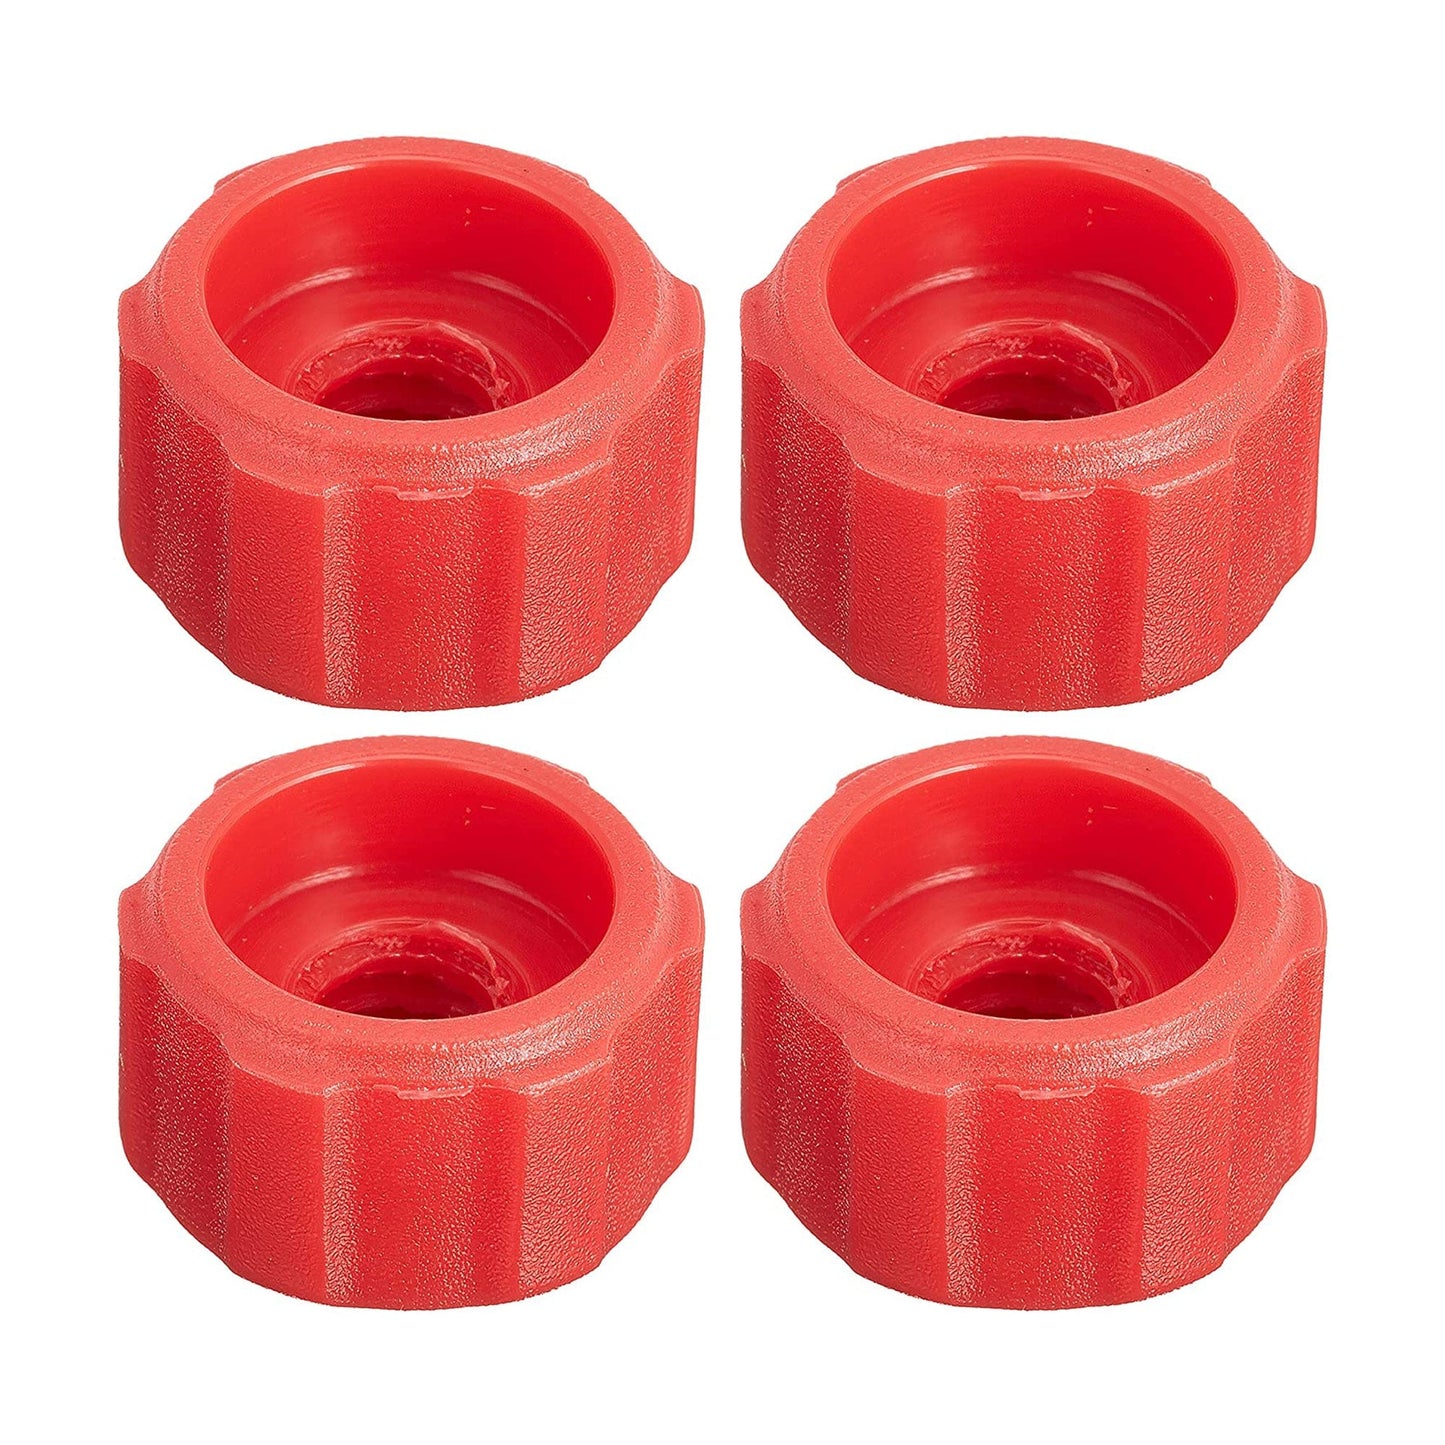 Canopus Red Lock Tuning Locks (16 Pack Bundle) Drums and Percussion / Parts and Accessories / Drum Parts